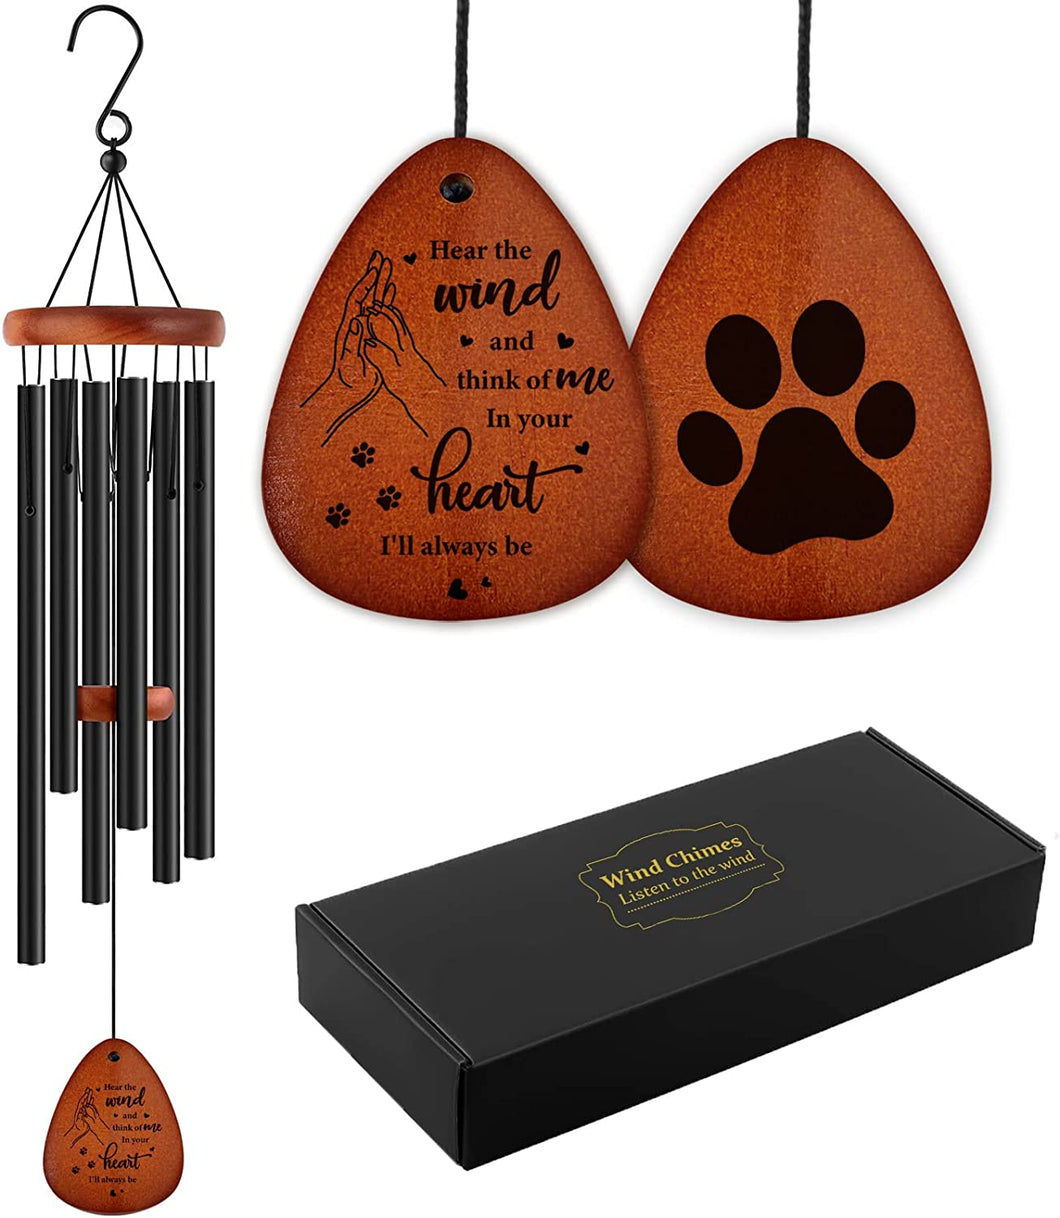 Dog Memorial Gifts for Loss of Dog, Pet Memorial Wind Chime, Loss of Dog Sympathy Gift, Pet Loss Bereavement Gifts in Memory of Dog Cat.